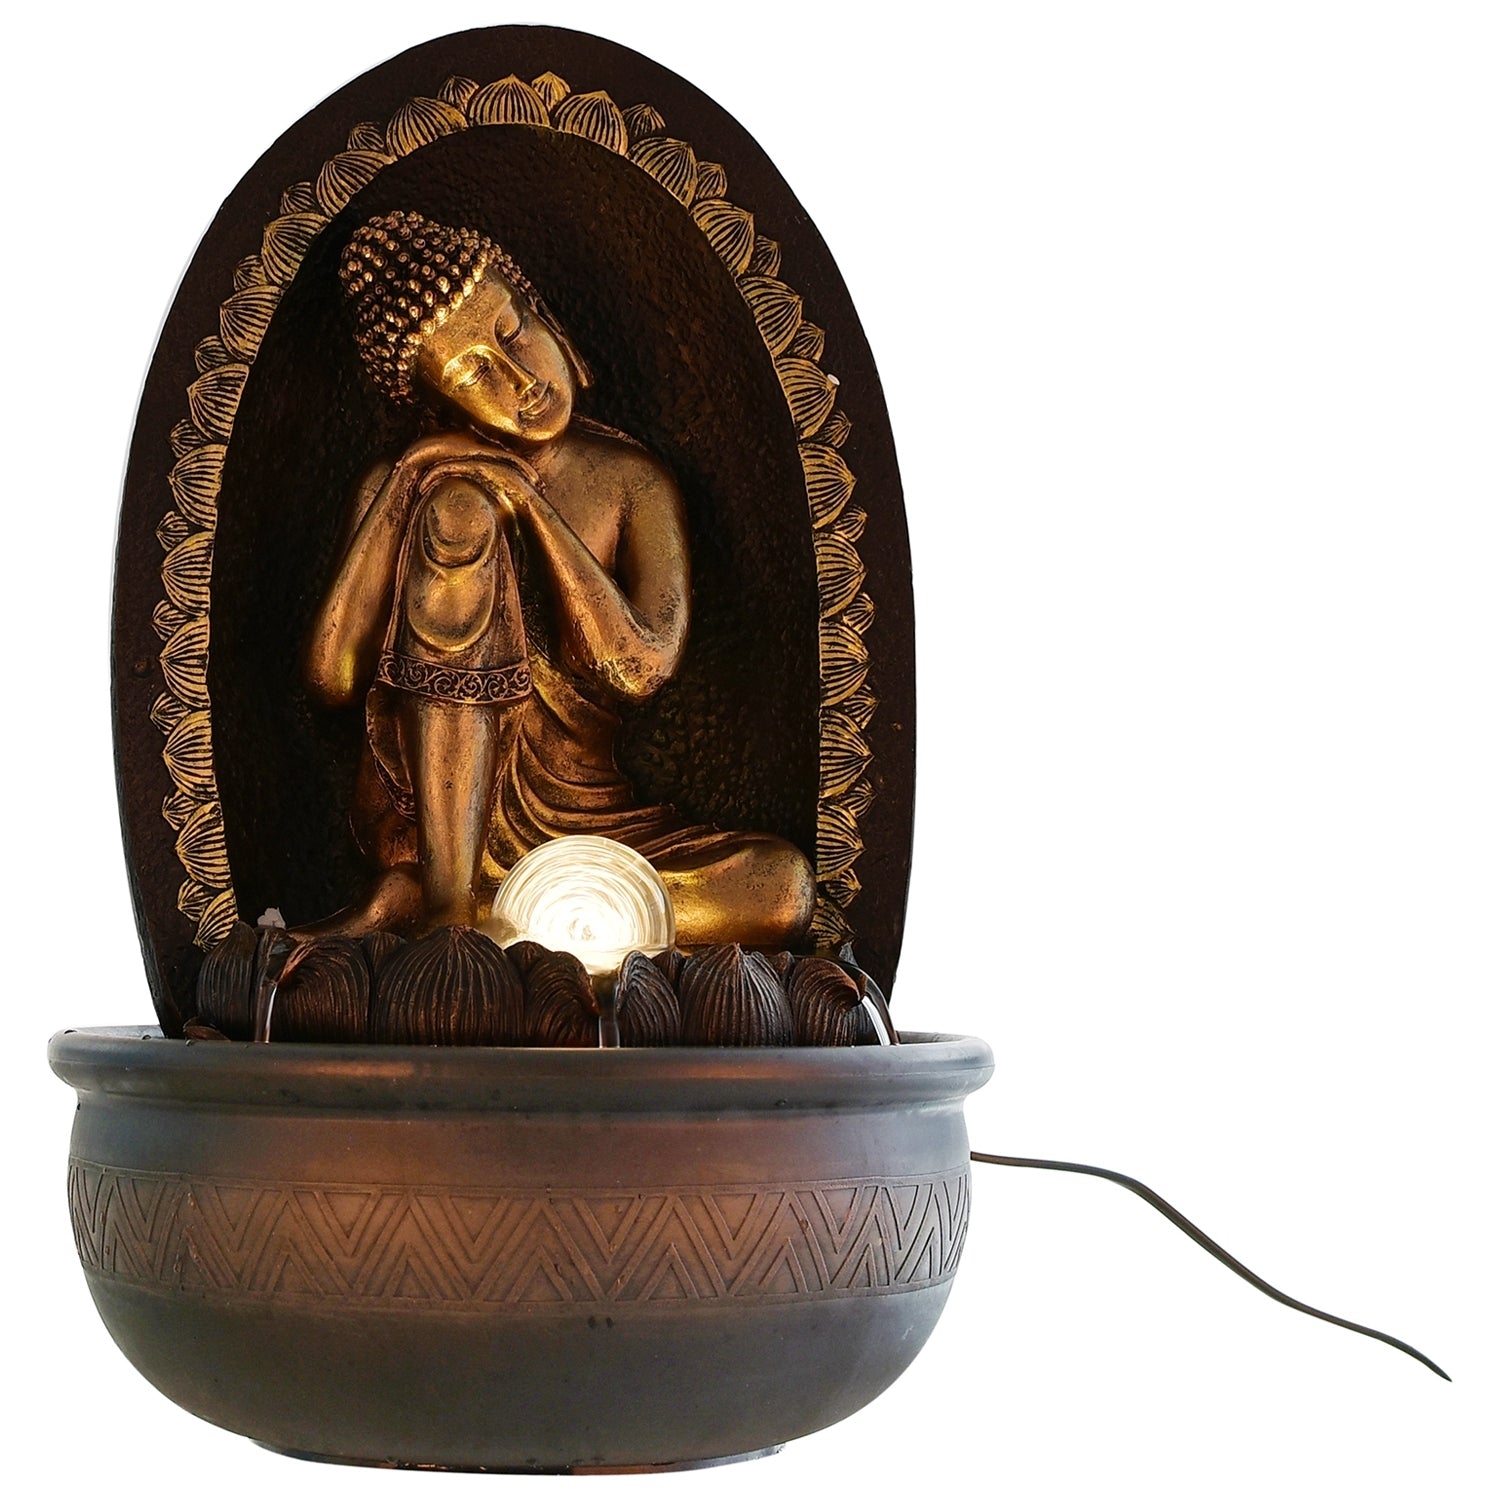 Polystone Brown and Golden Buddha On Knee Statue Water Fountain With Crystal Ball for Home/Office Decor